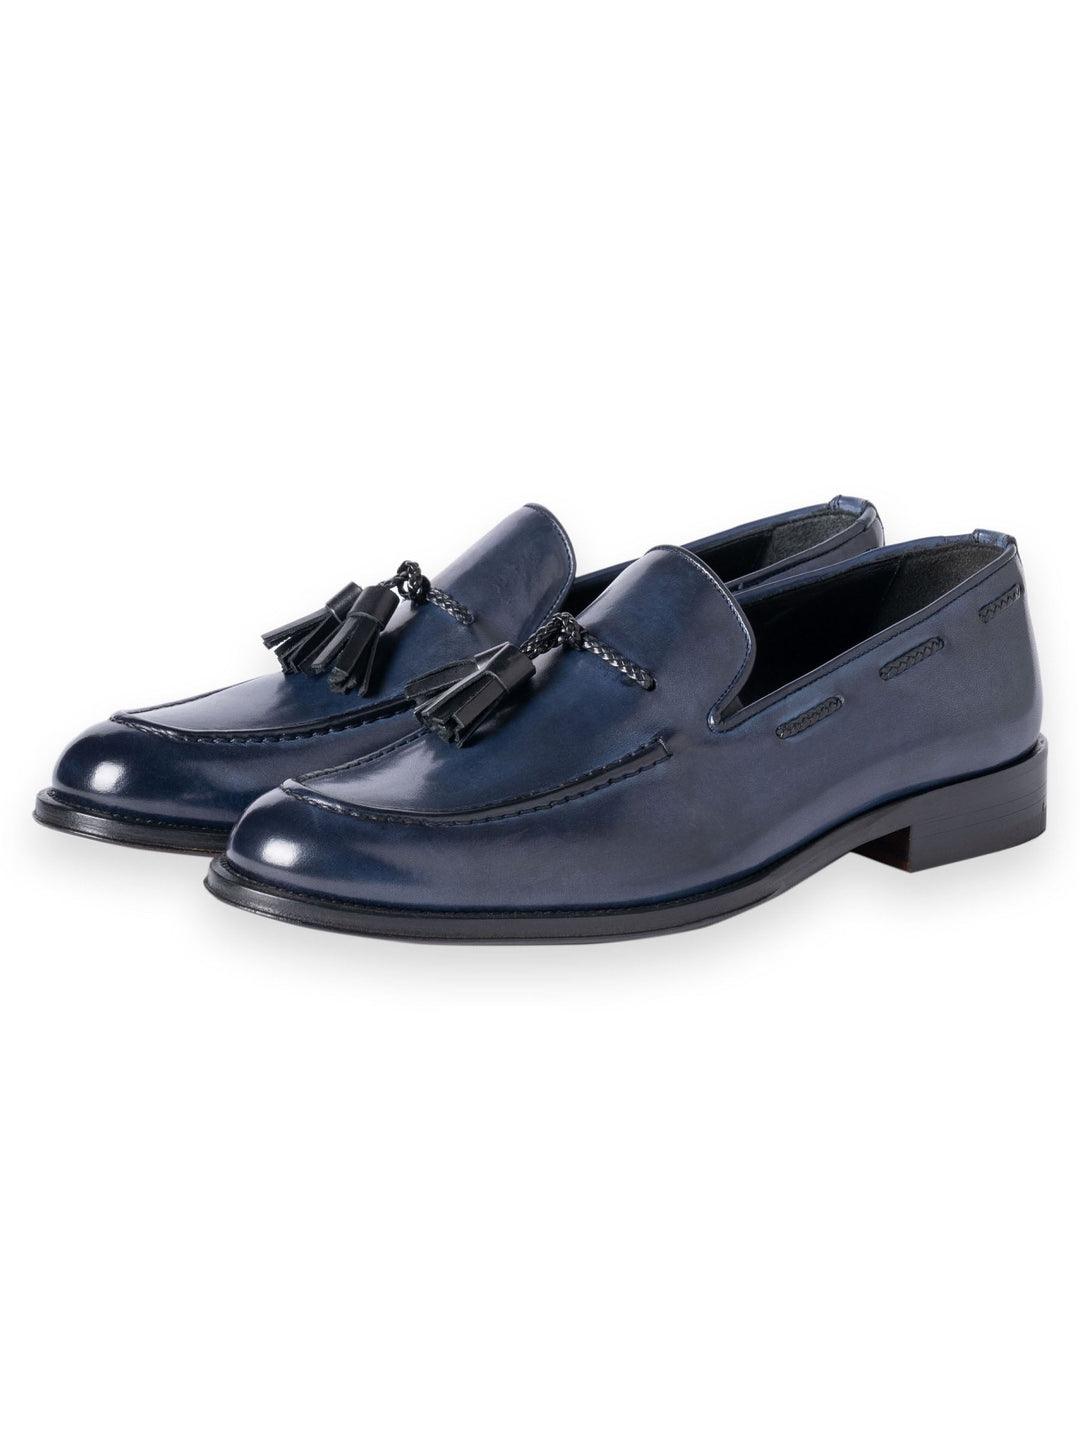 navy blue leather tassel loafers on white background